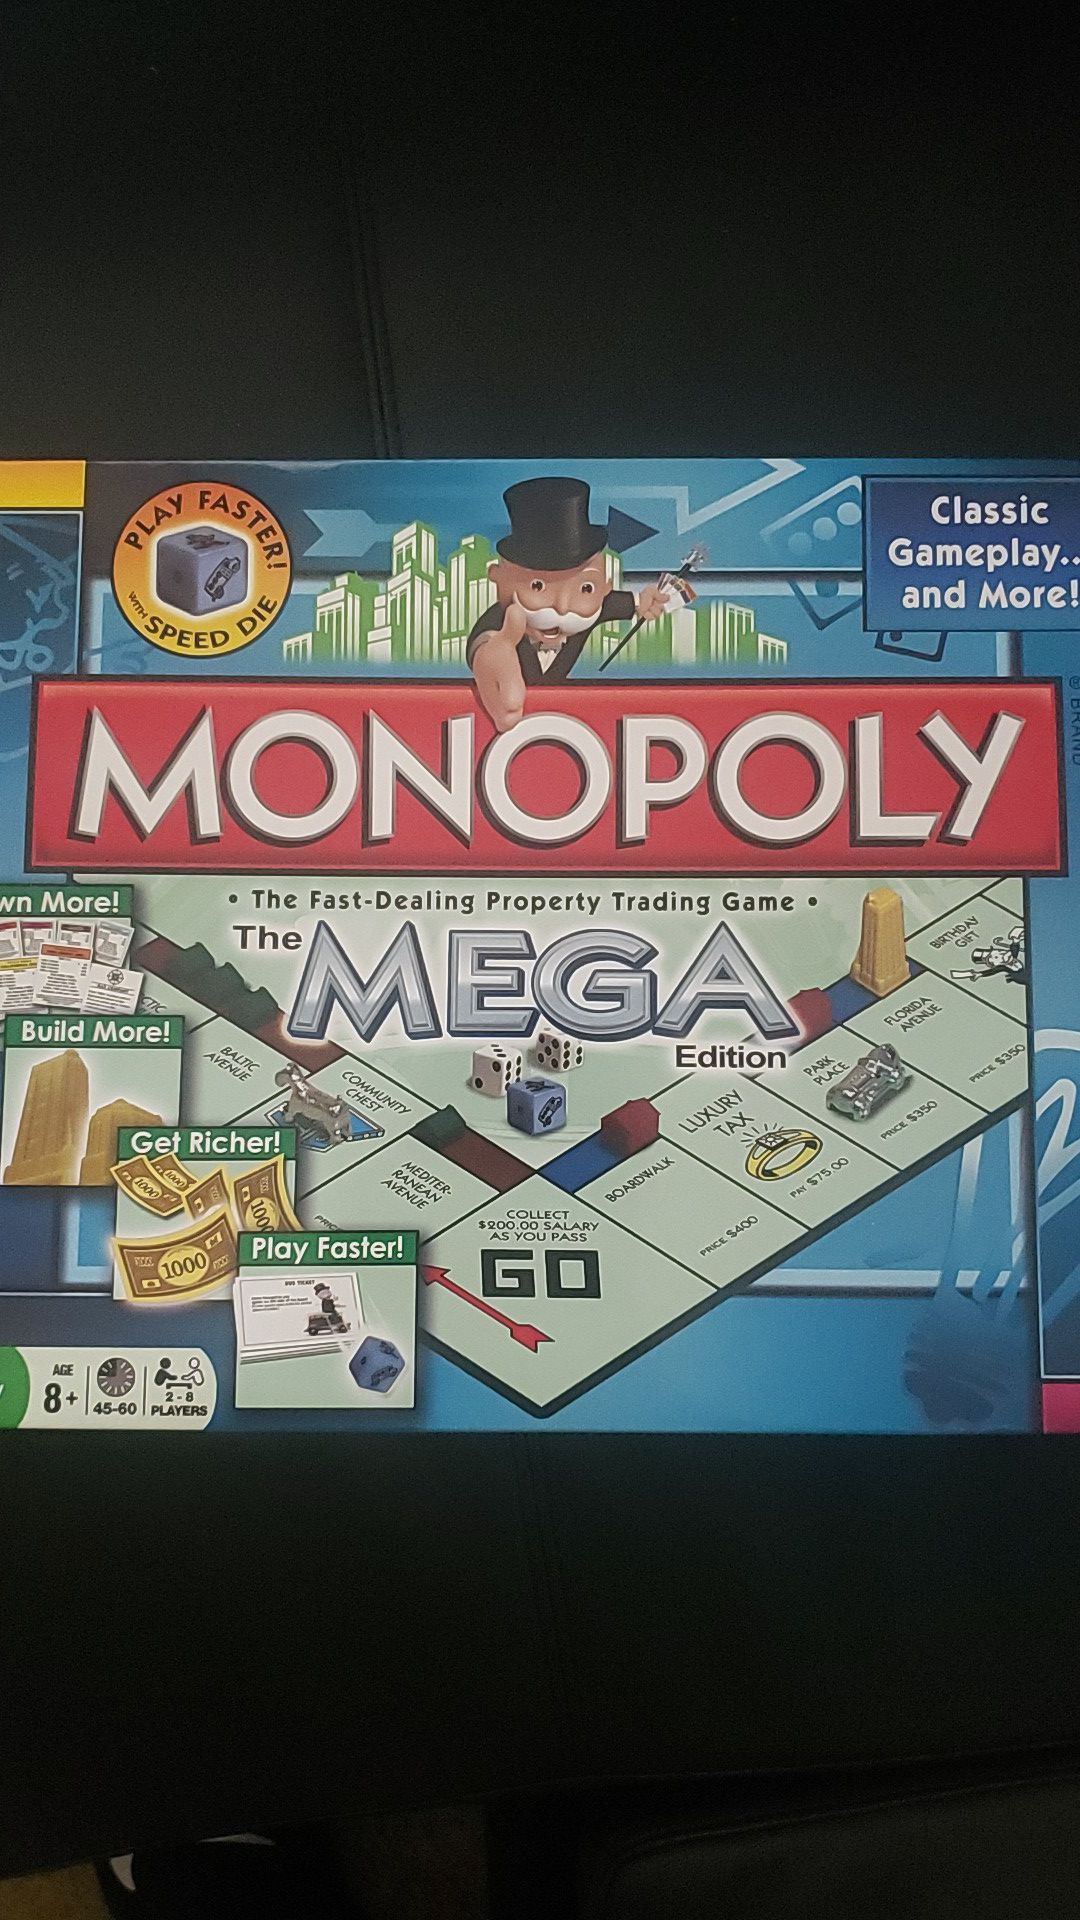 Monopoly The Mega Edition "Brand New"